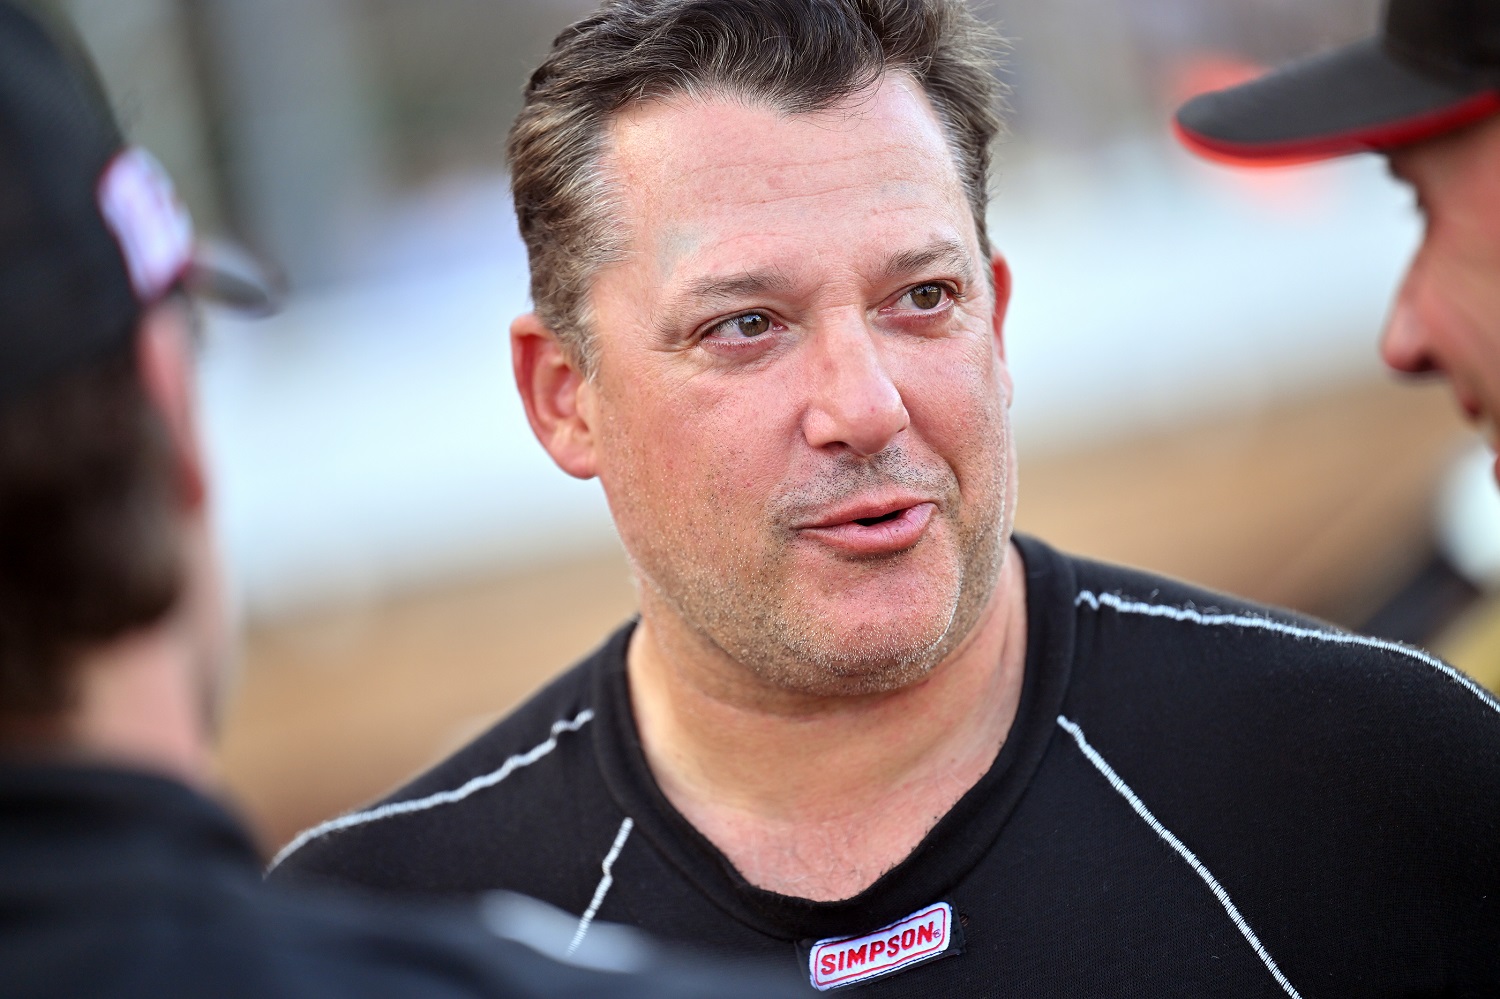 Tony Stewart talks to other drivers prior to the SRX qualifying race at Sharon Speedway on July 23, 2022 in Hartford, Ohio.